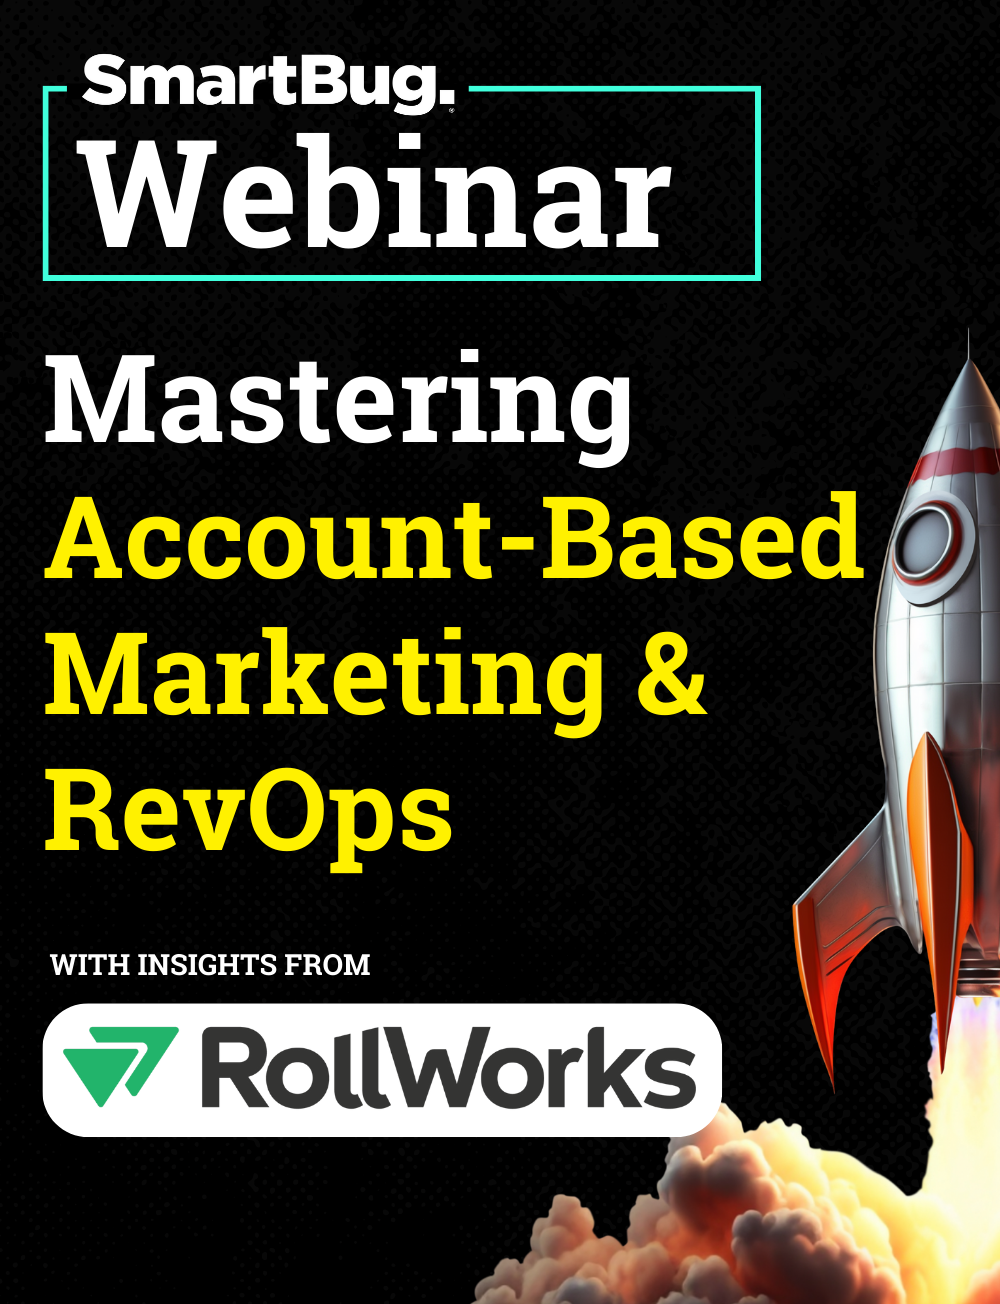 Promotional image for SmartBug Webinar with Rollworks on ABM and RevOps